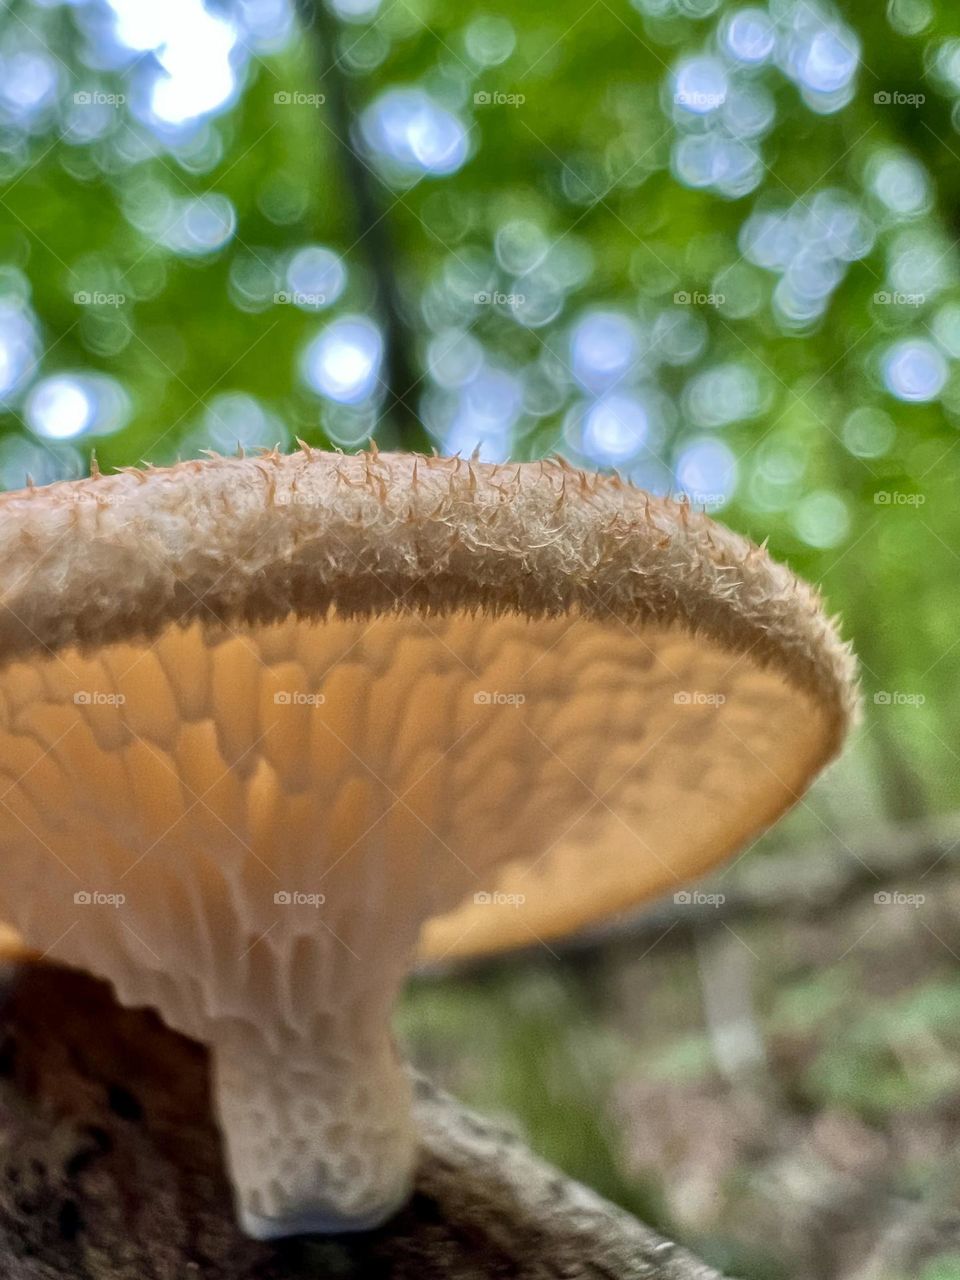 Closeup low angle view of wild mushrooms in natural setting. Detail on the underside to highlight the intricate gills